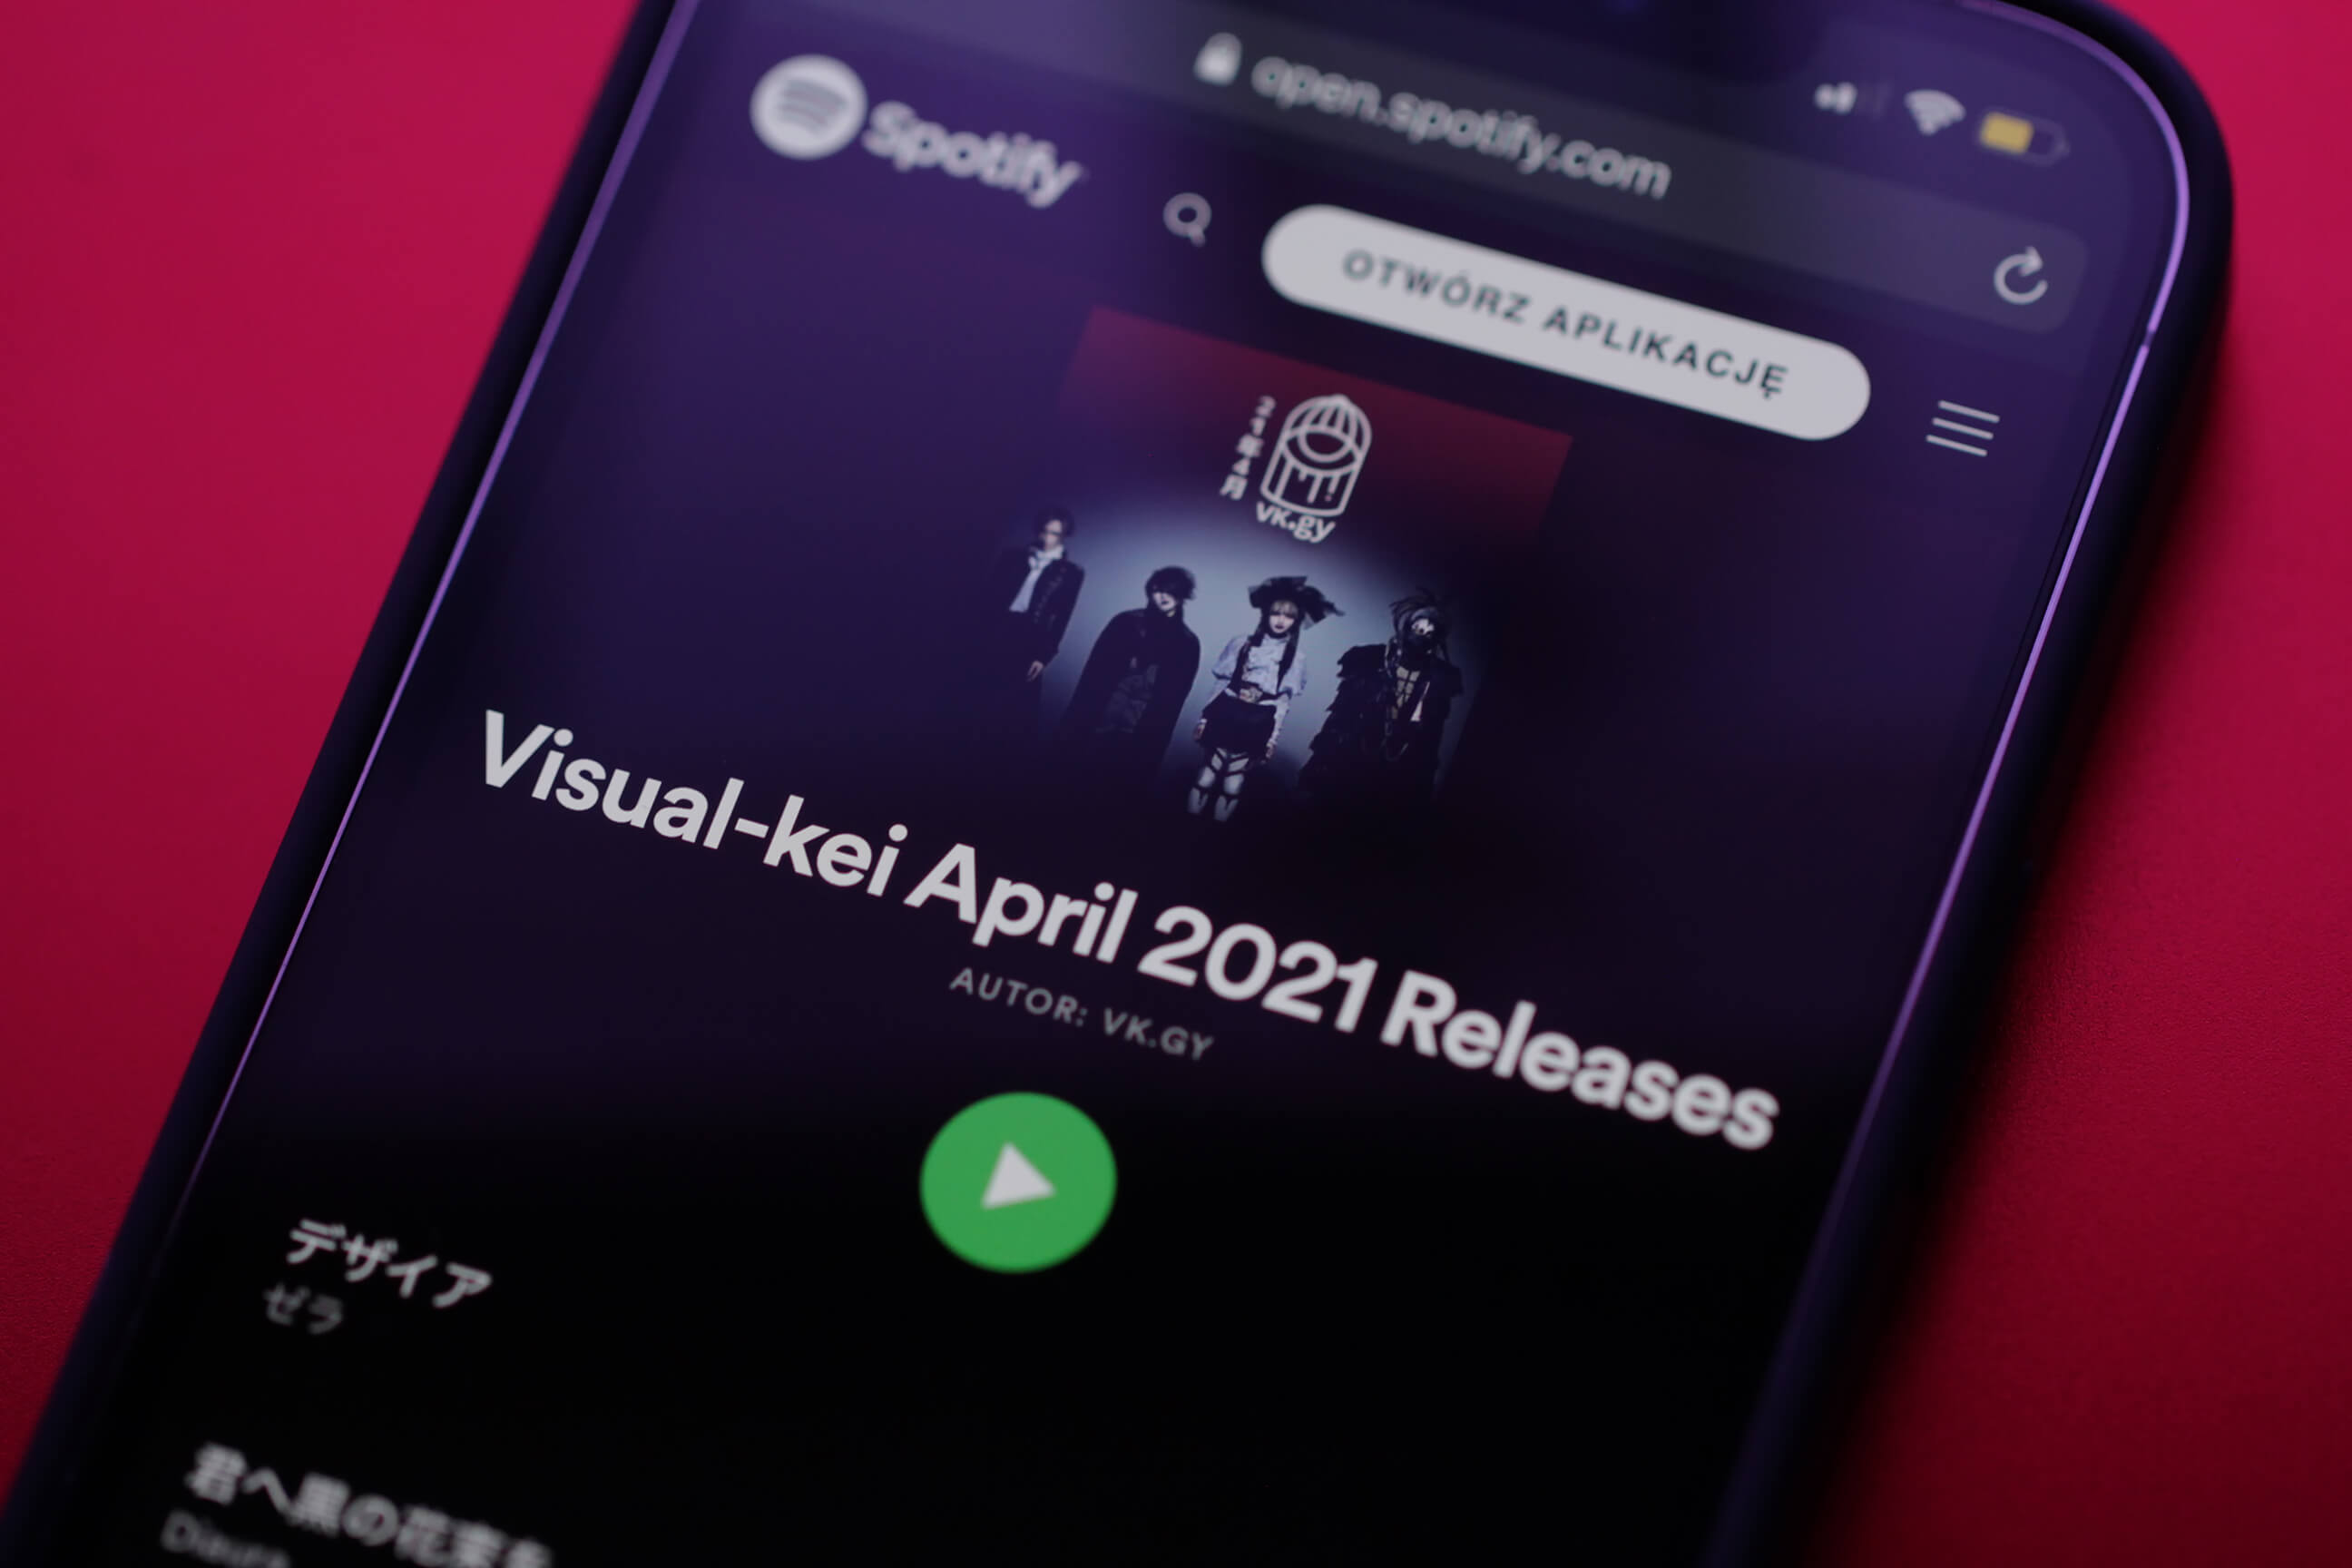 New Releases Playlist - April 2021